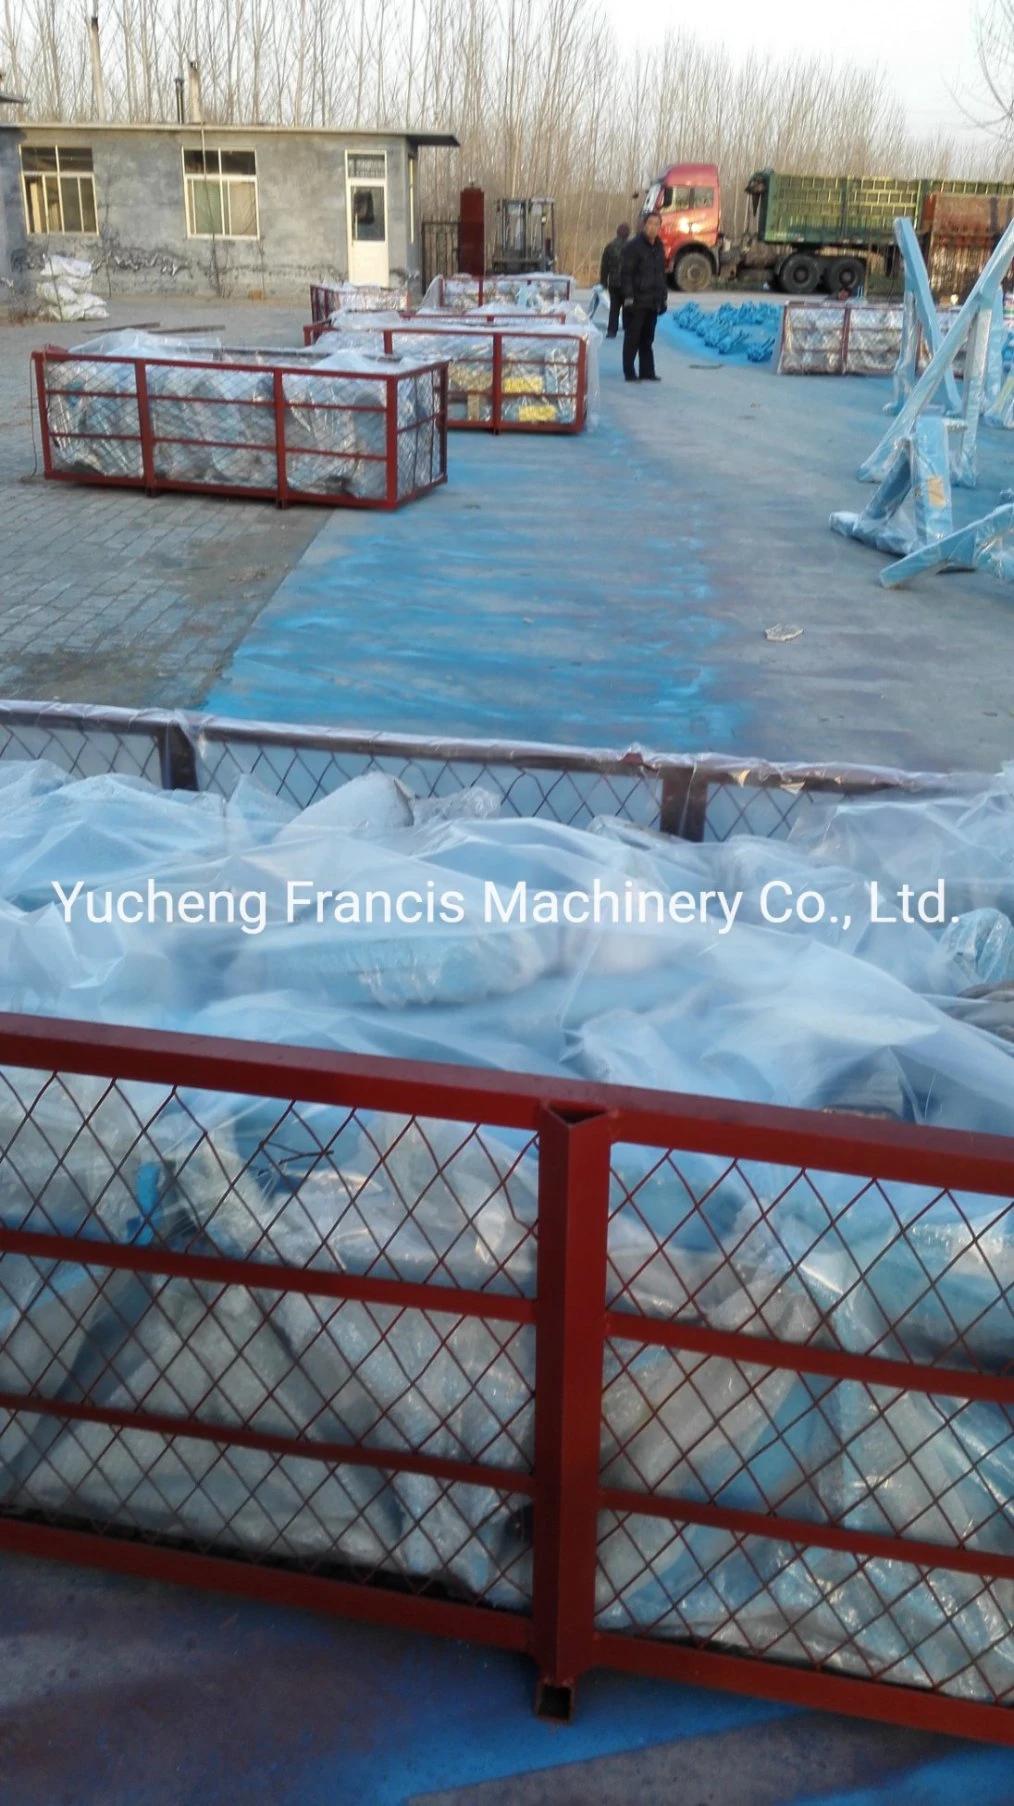 Agricultural Machinery Heavy Fish Ploughs Sell Heavy Ploughs